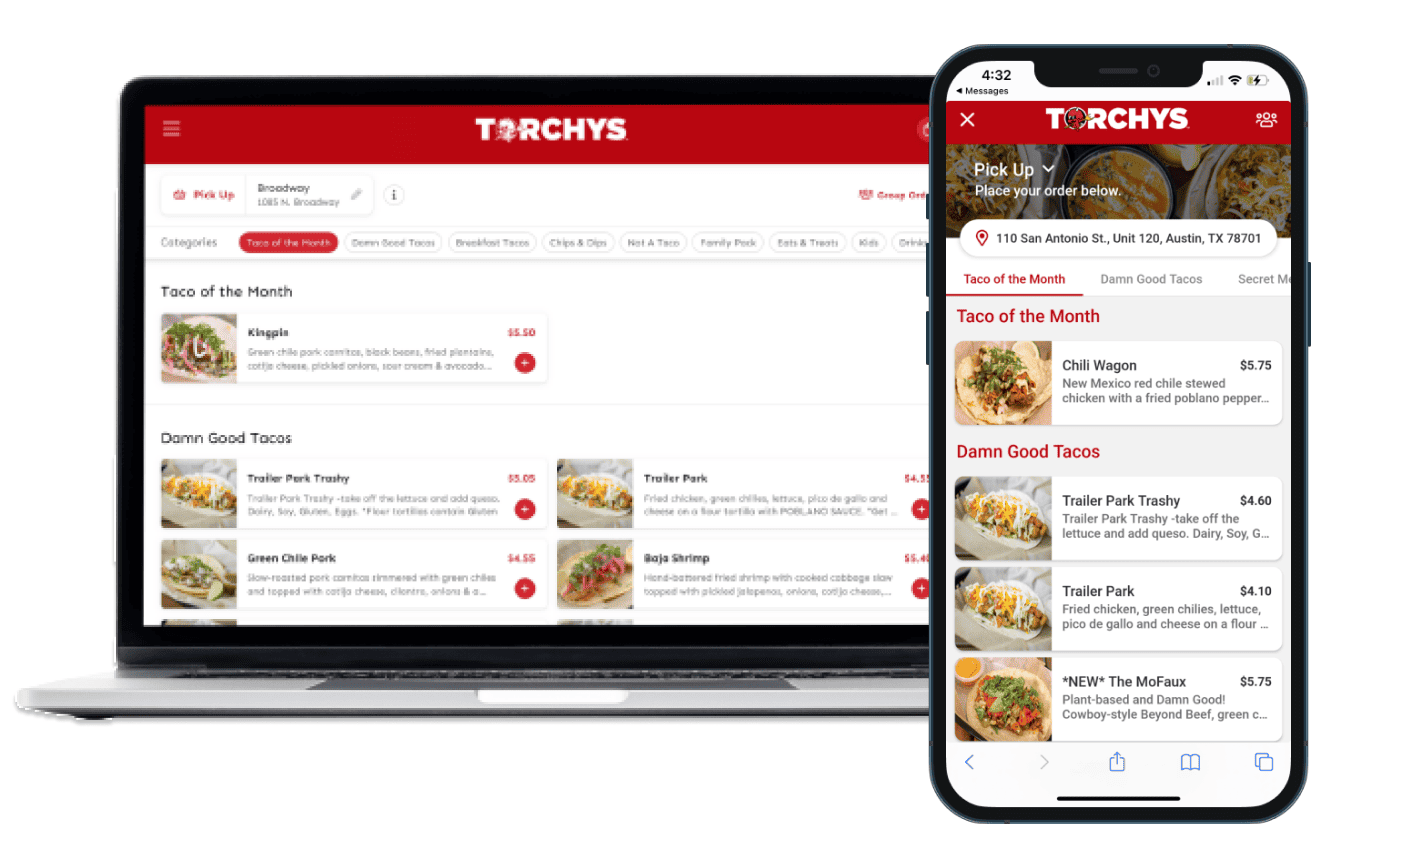 CardFree case study Torchy's Tacos online ordering